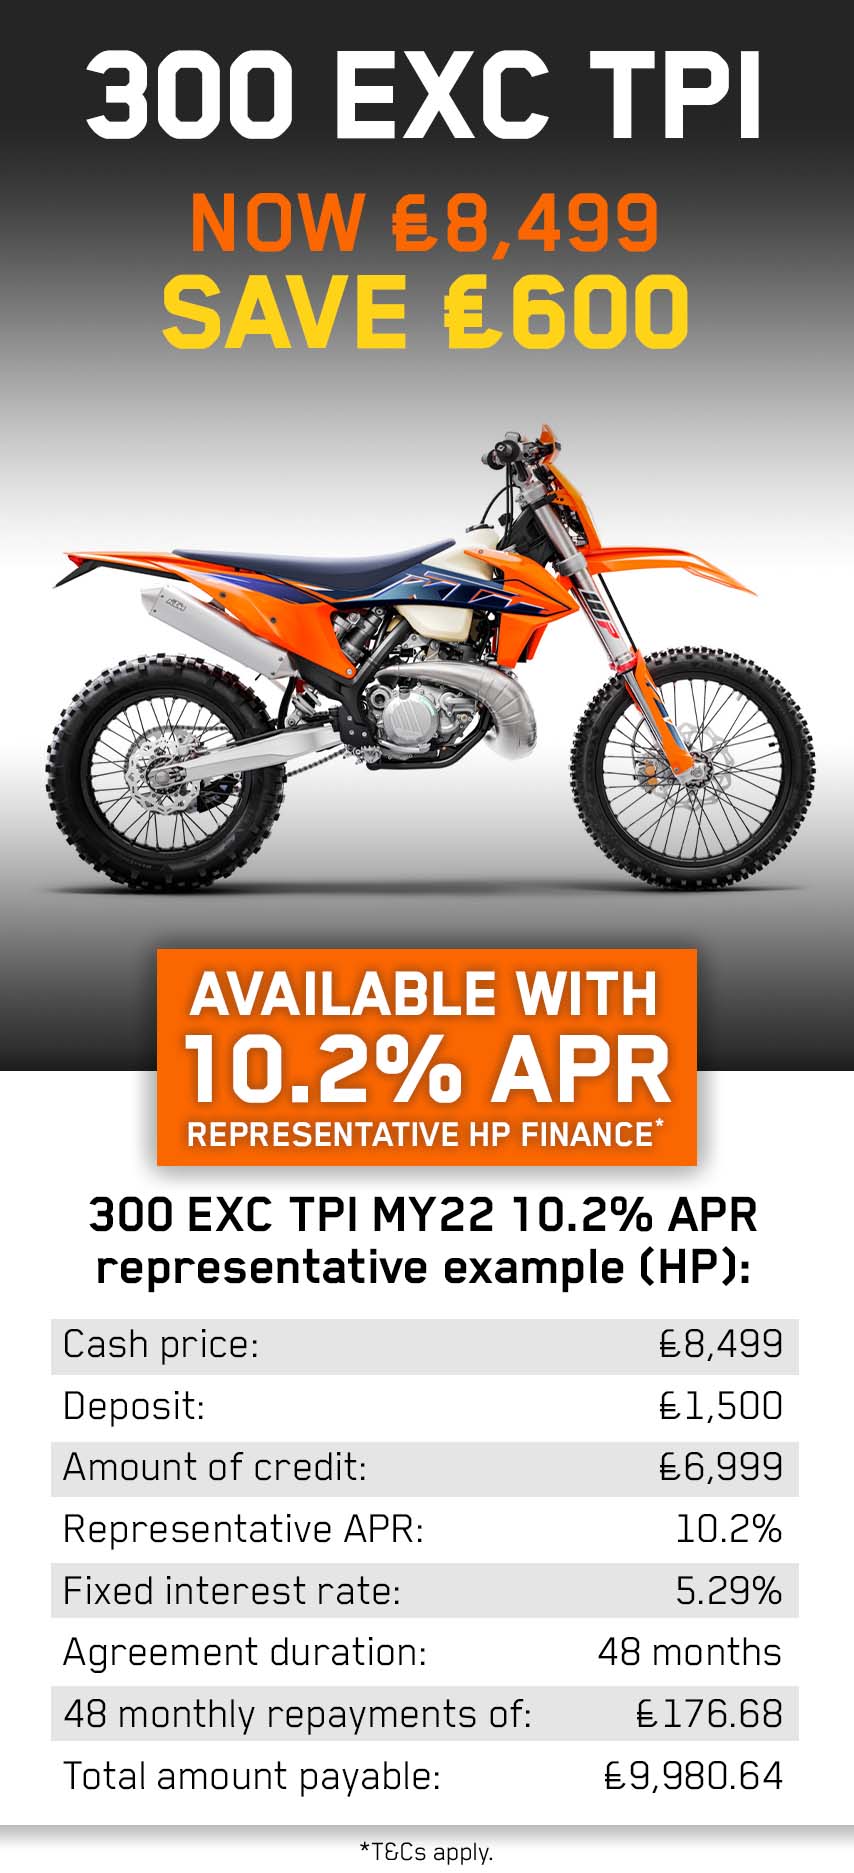 Exclusive Laguna offer now available on the KTM 300 EXC TPI